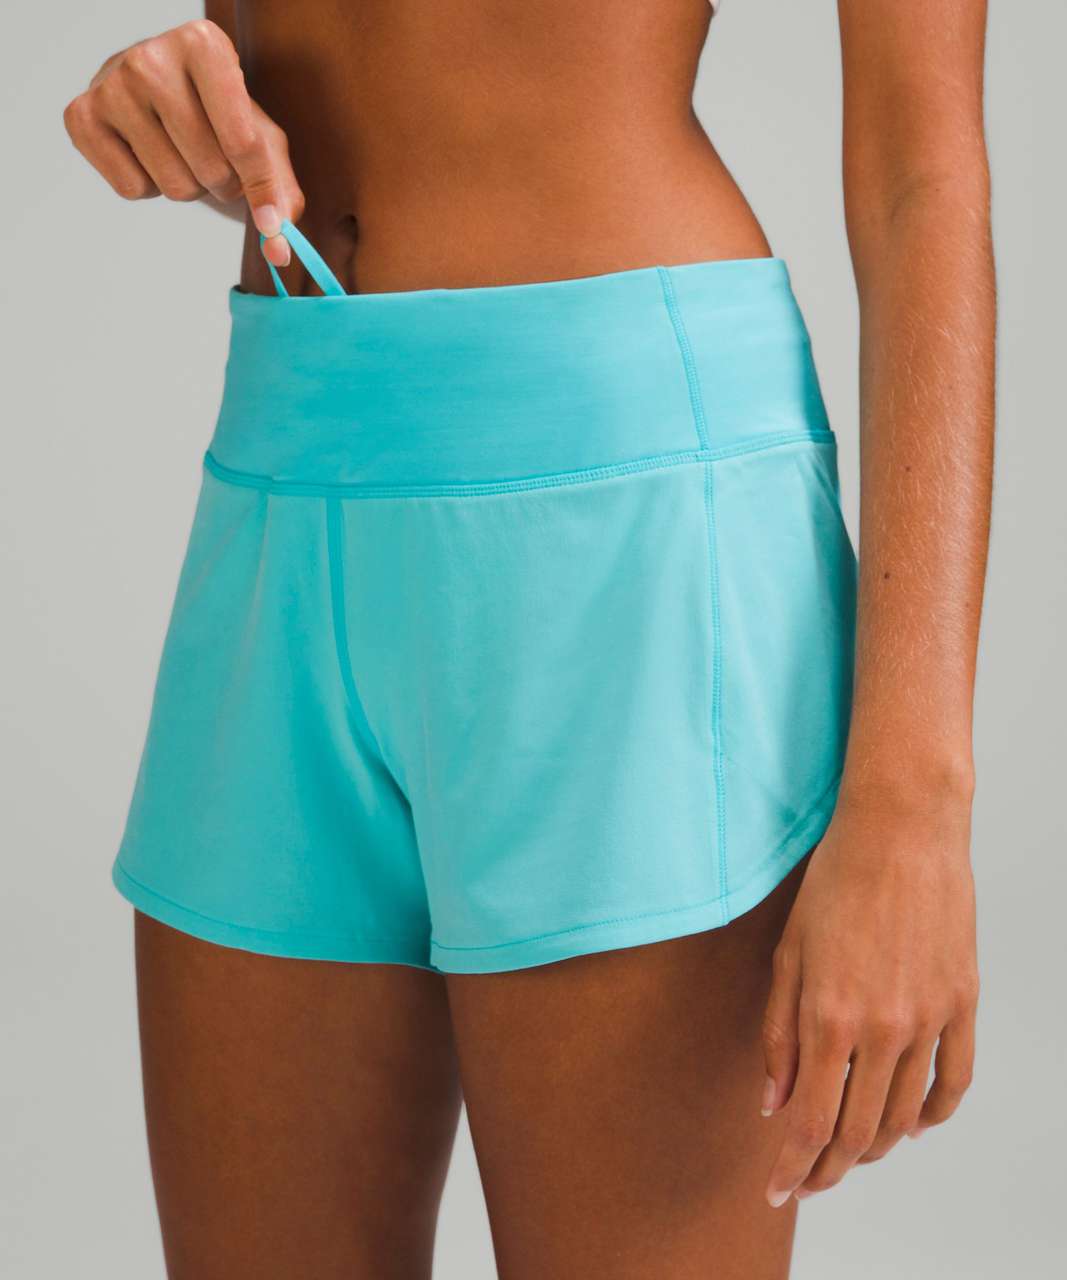 Lululemon Speed Up Mid-Rise Lined Short 4" - Electric Turquoise